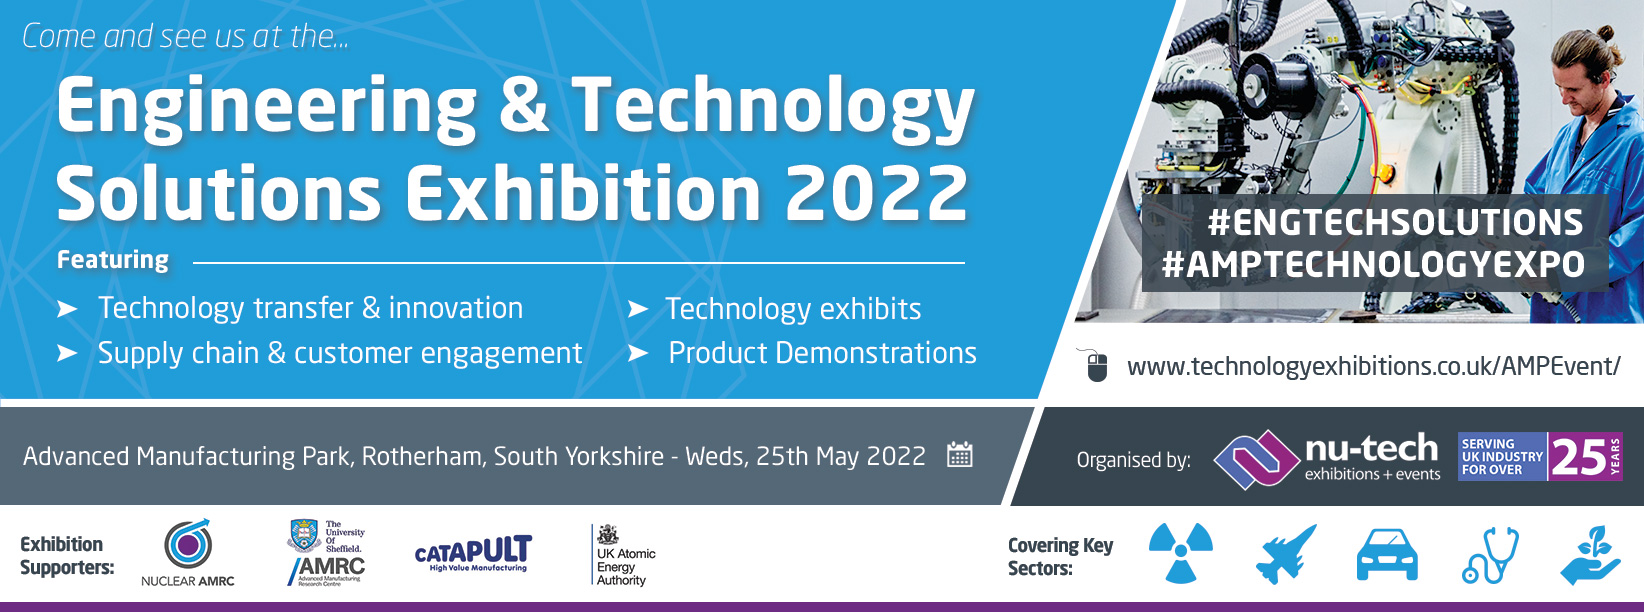 Engineering & Technology Solutions Exhibition 2022